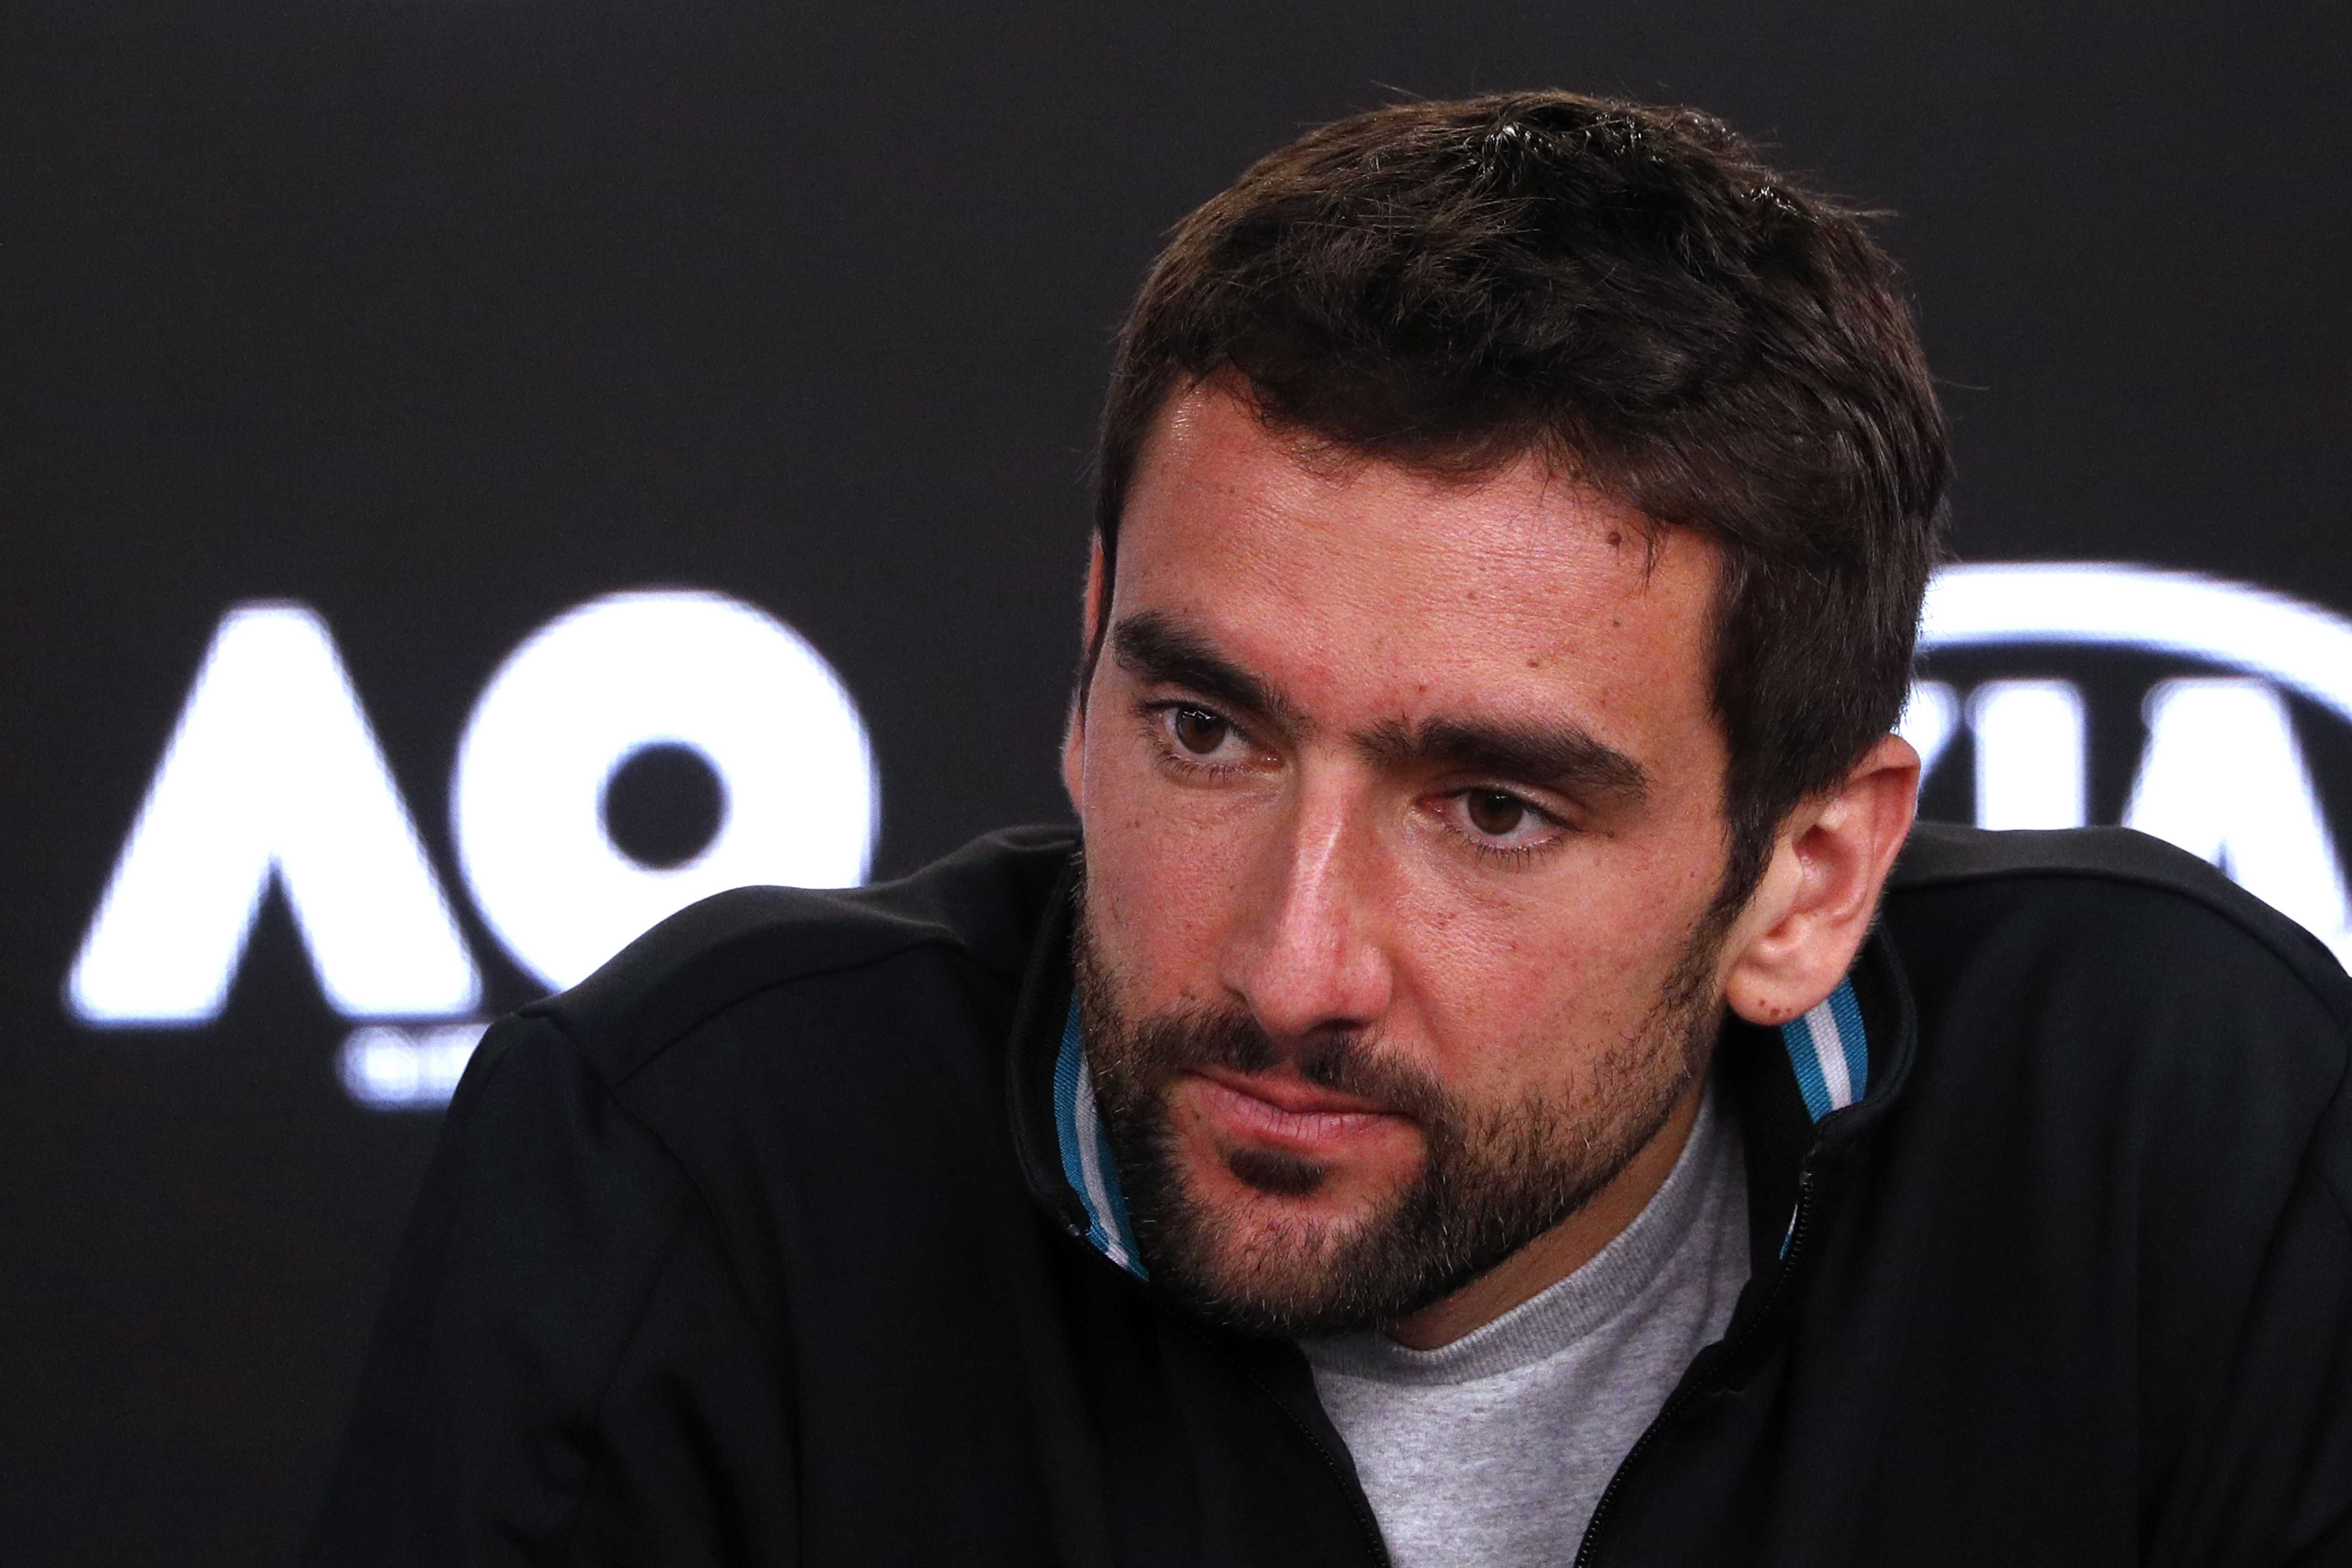 Tennis: Cilic blames closed roof for slow start against Federer